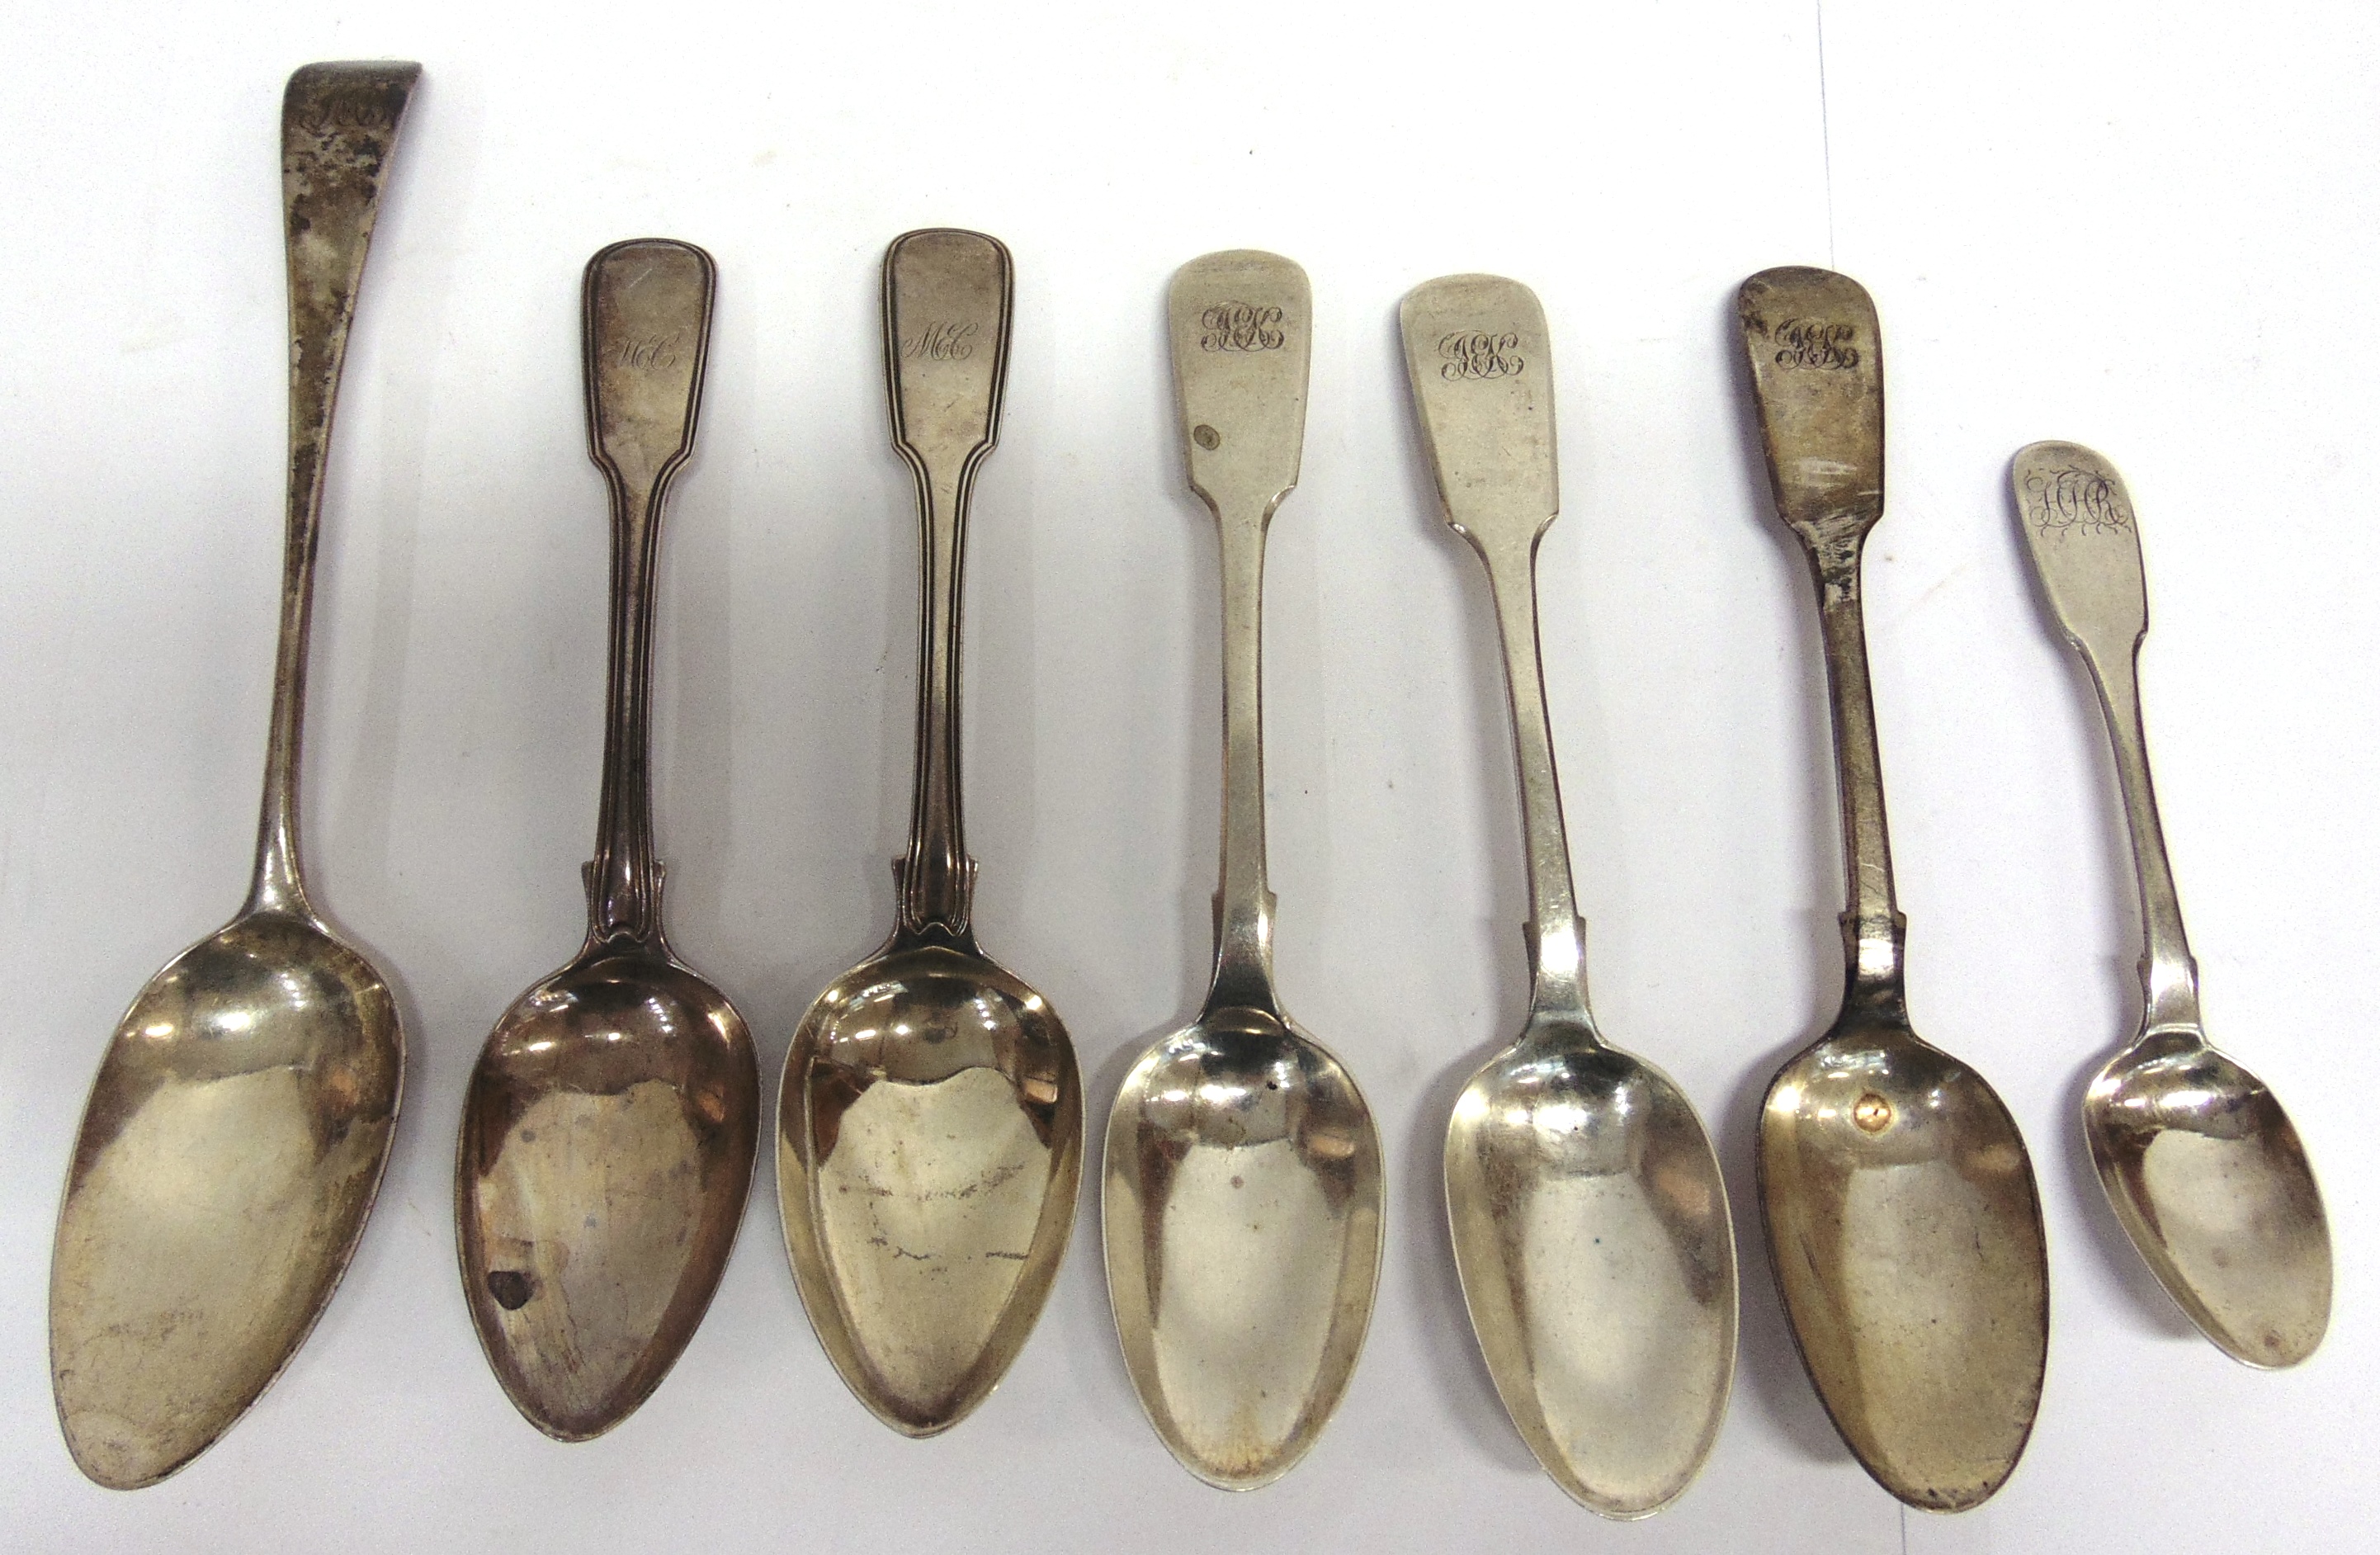 A GEORGE III SILVER OLD ENGLISH PATTERN TABLESPOON by Samuel Davenport, London 1793, monogrammed;